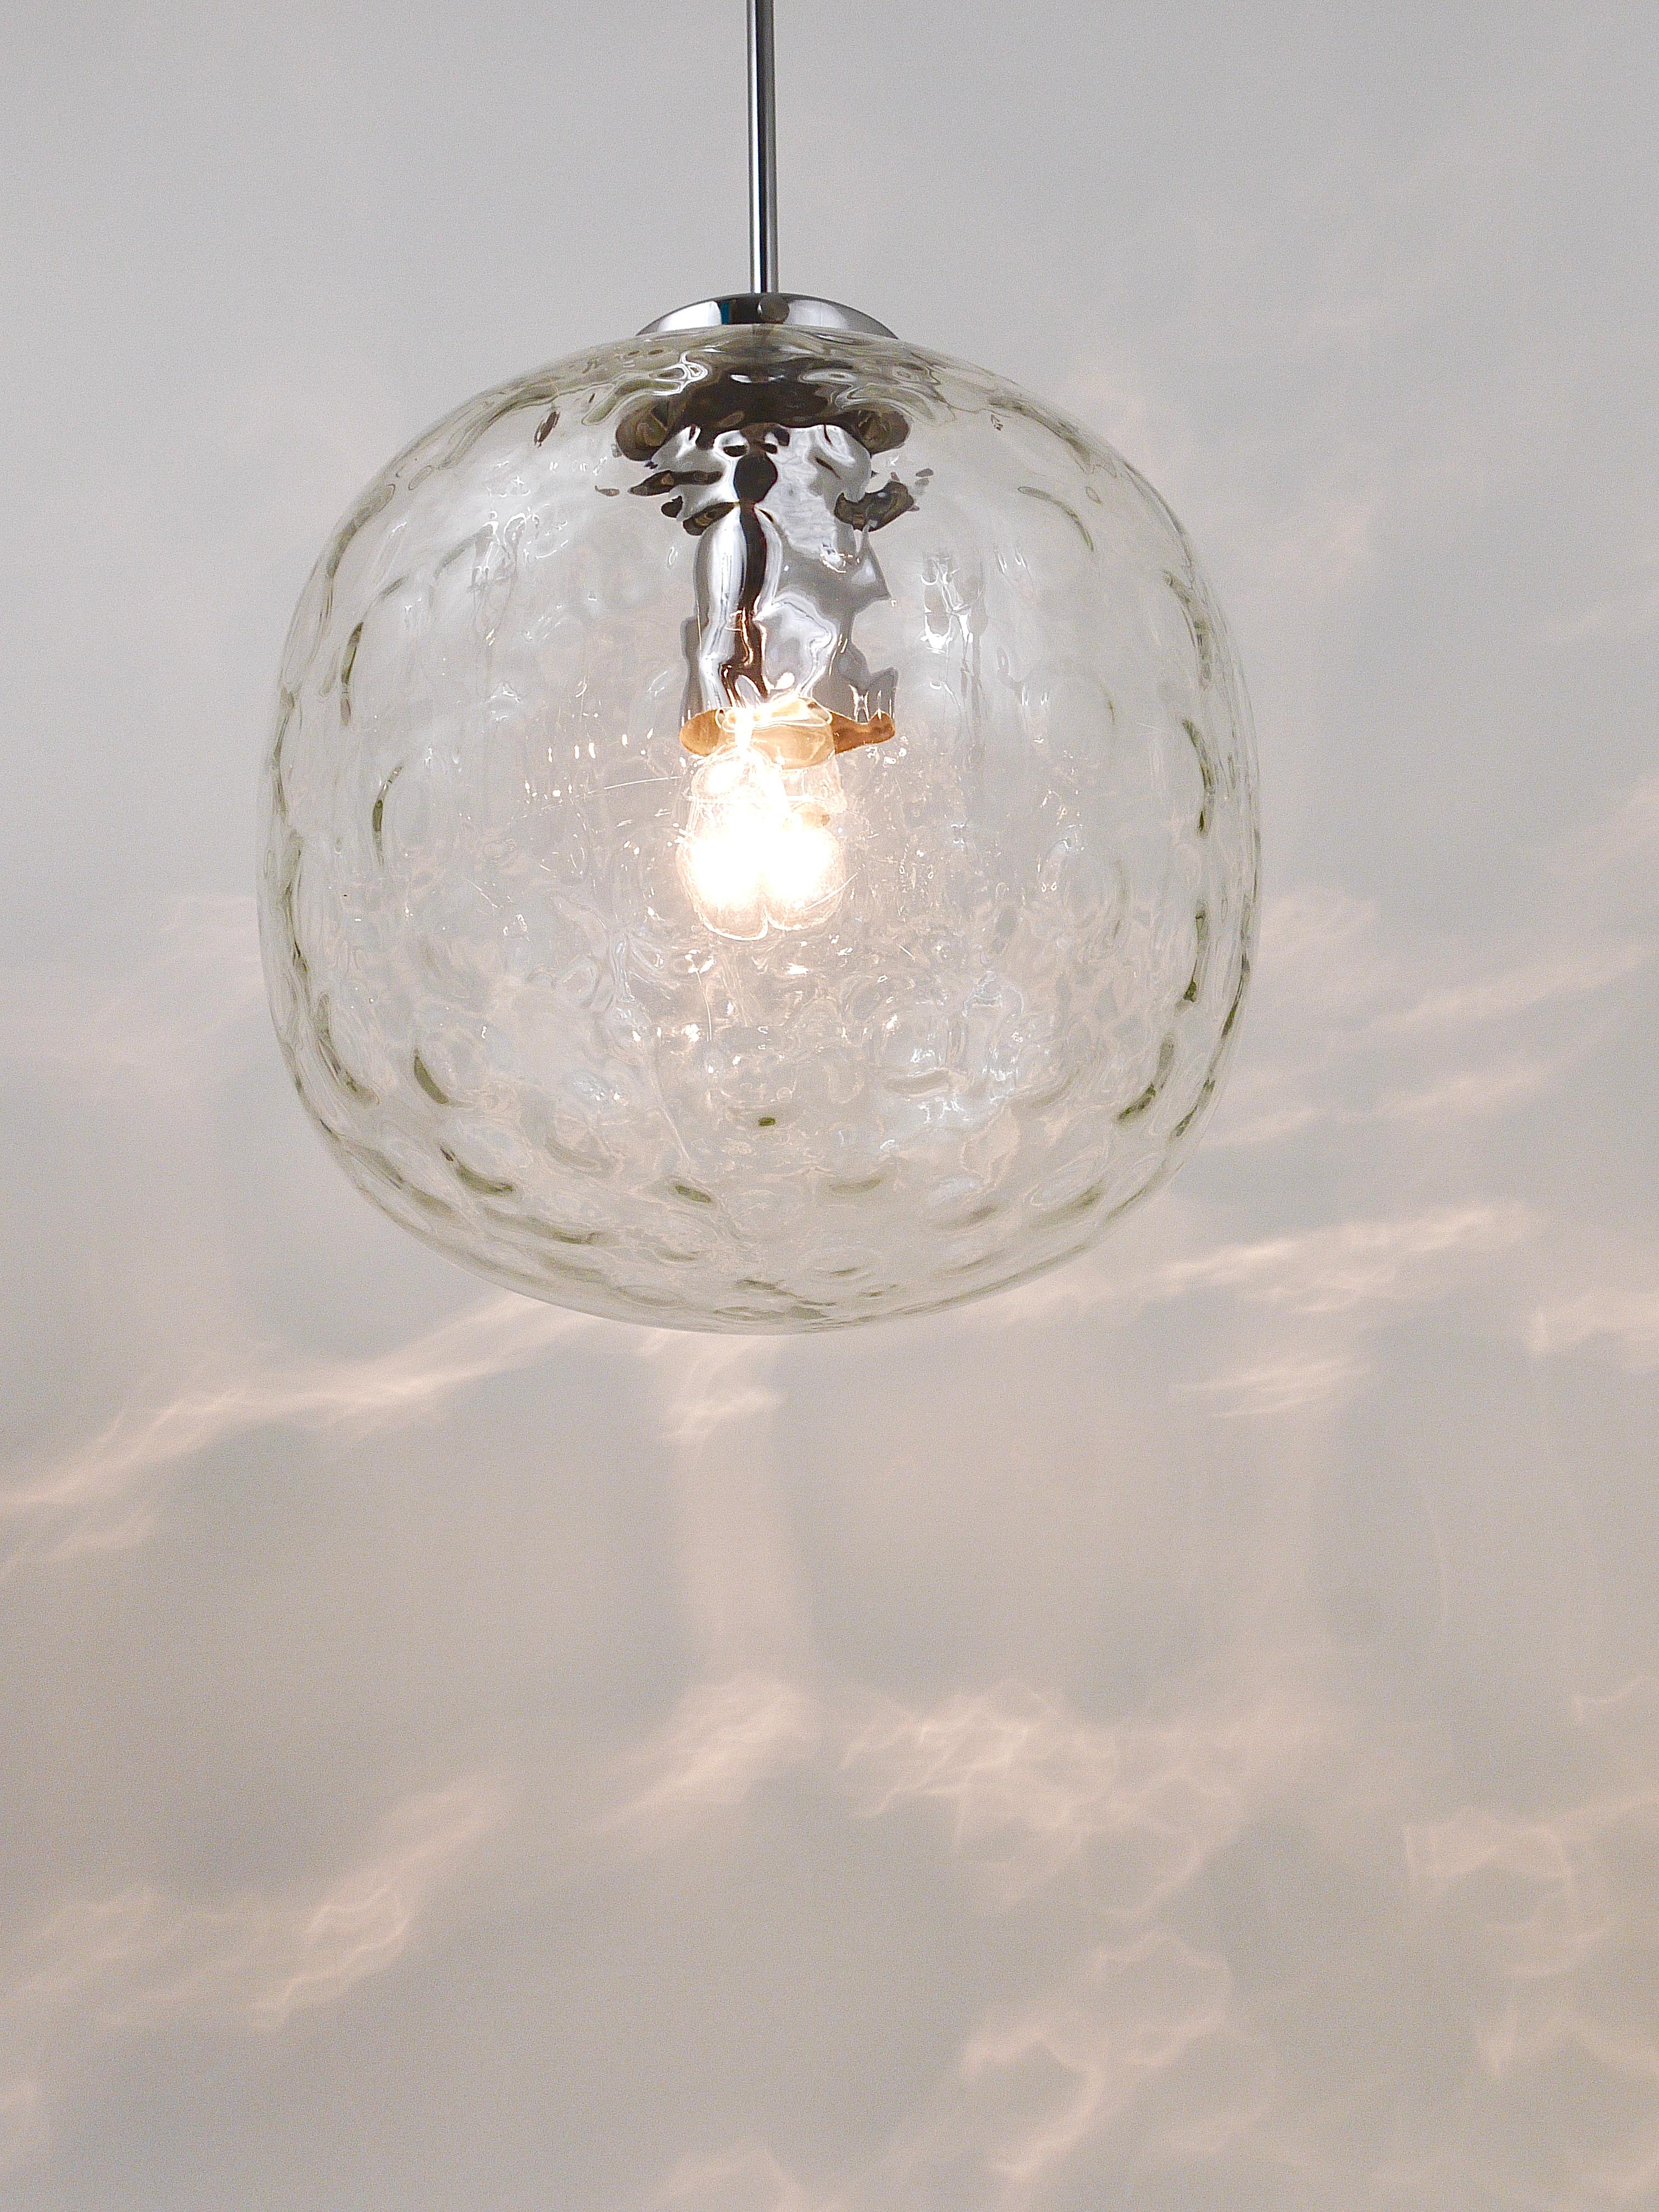 Large Bubble Melting Glass and Chrome Globe Pendant Lamp, Germany, 1970s For Sale 5